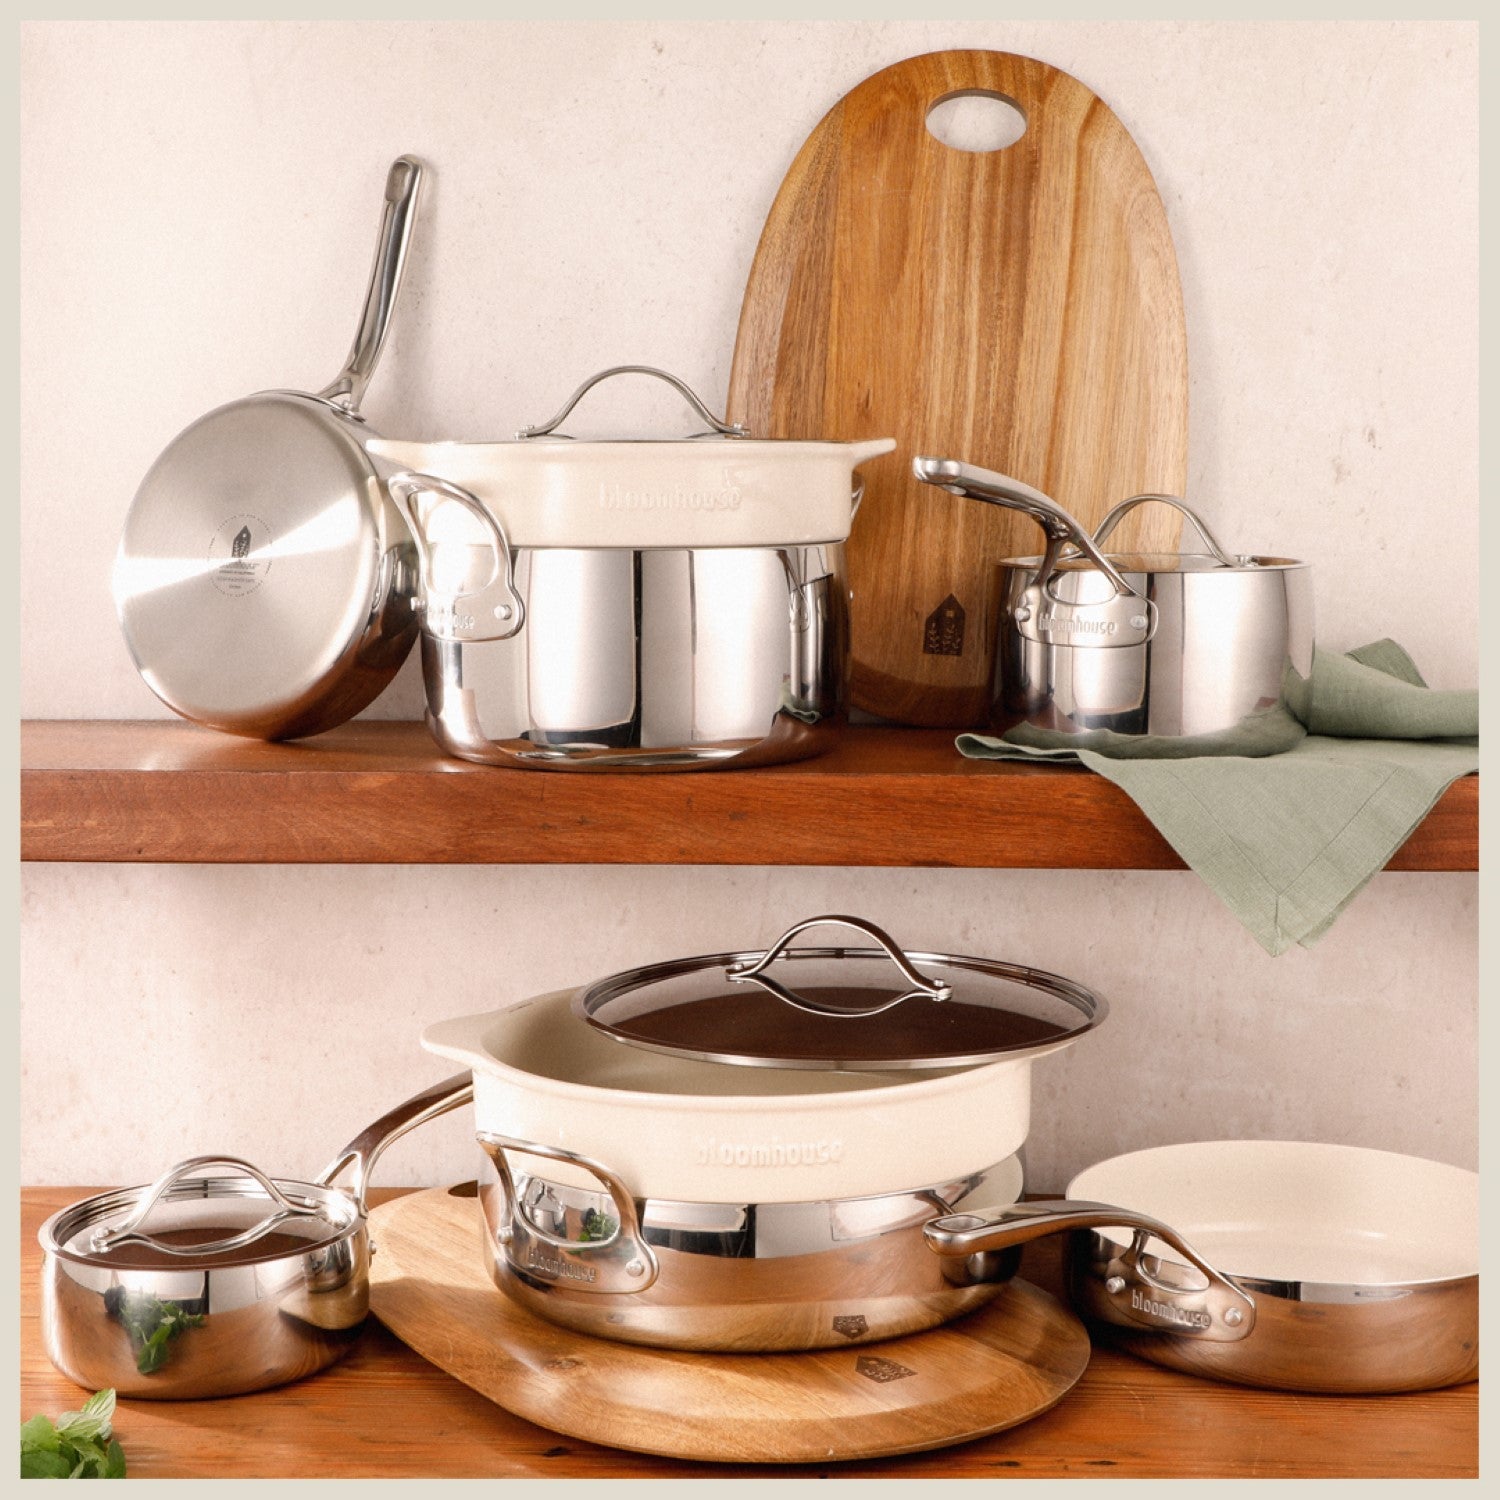 12 - Piece Non-Stick Stainless Steel (18/8) Cookware Set Bloomhouse